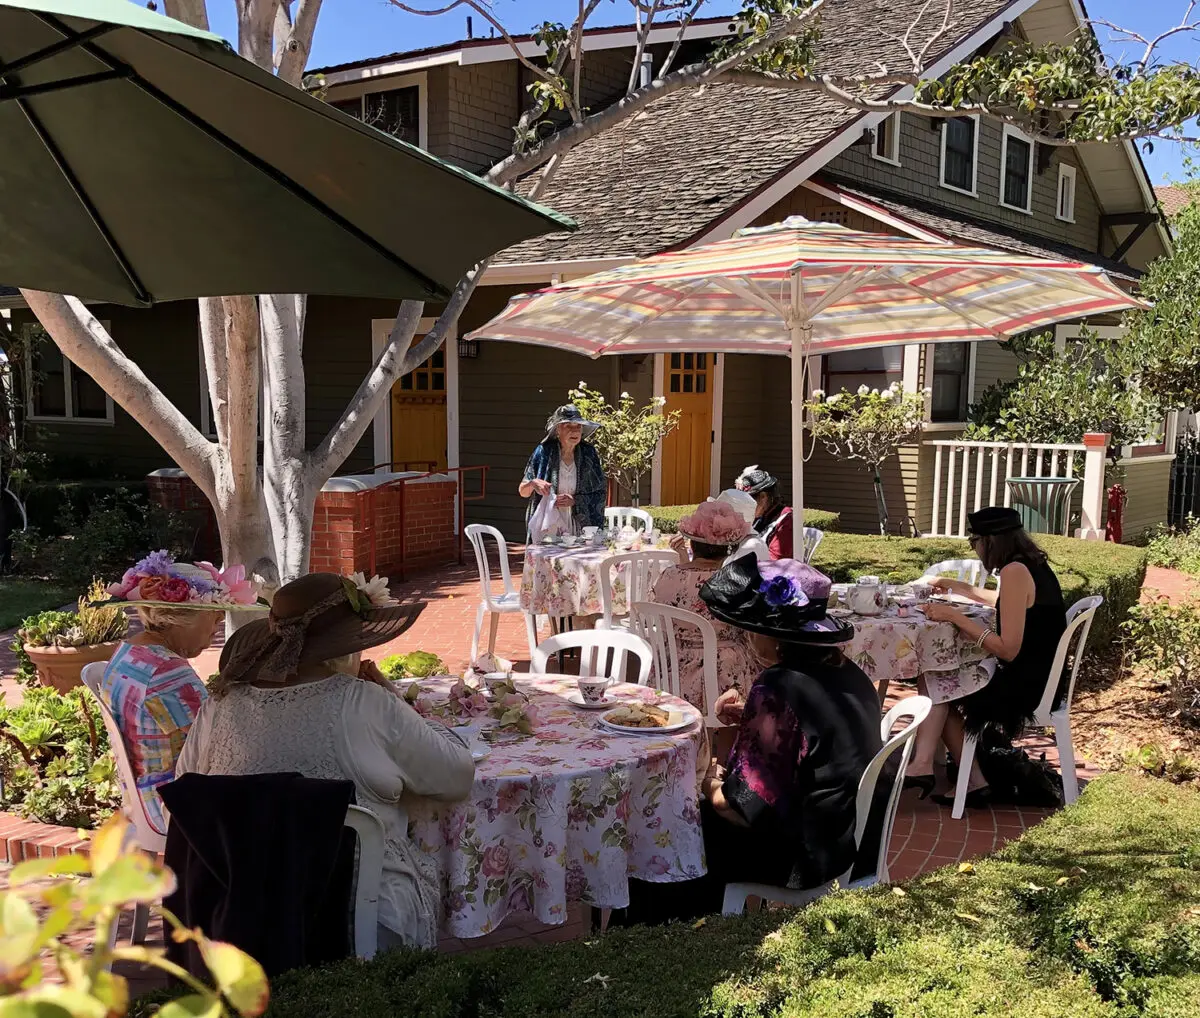 A group of people wearing vintage hats enjoys a tea party at Heritage Square, with tables covered in floral tablecloths, surrounded by lush greenery and a quaint house in the background.